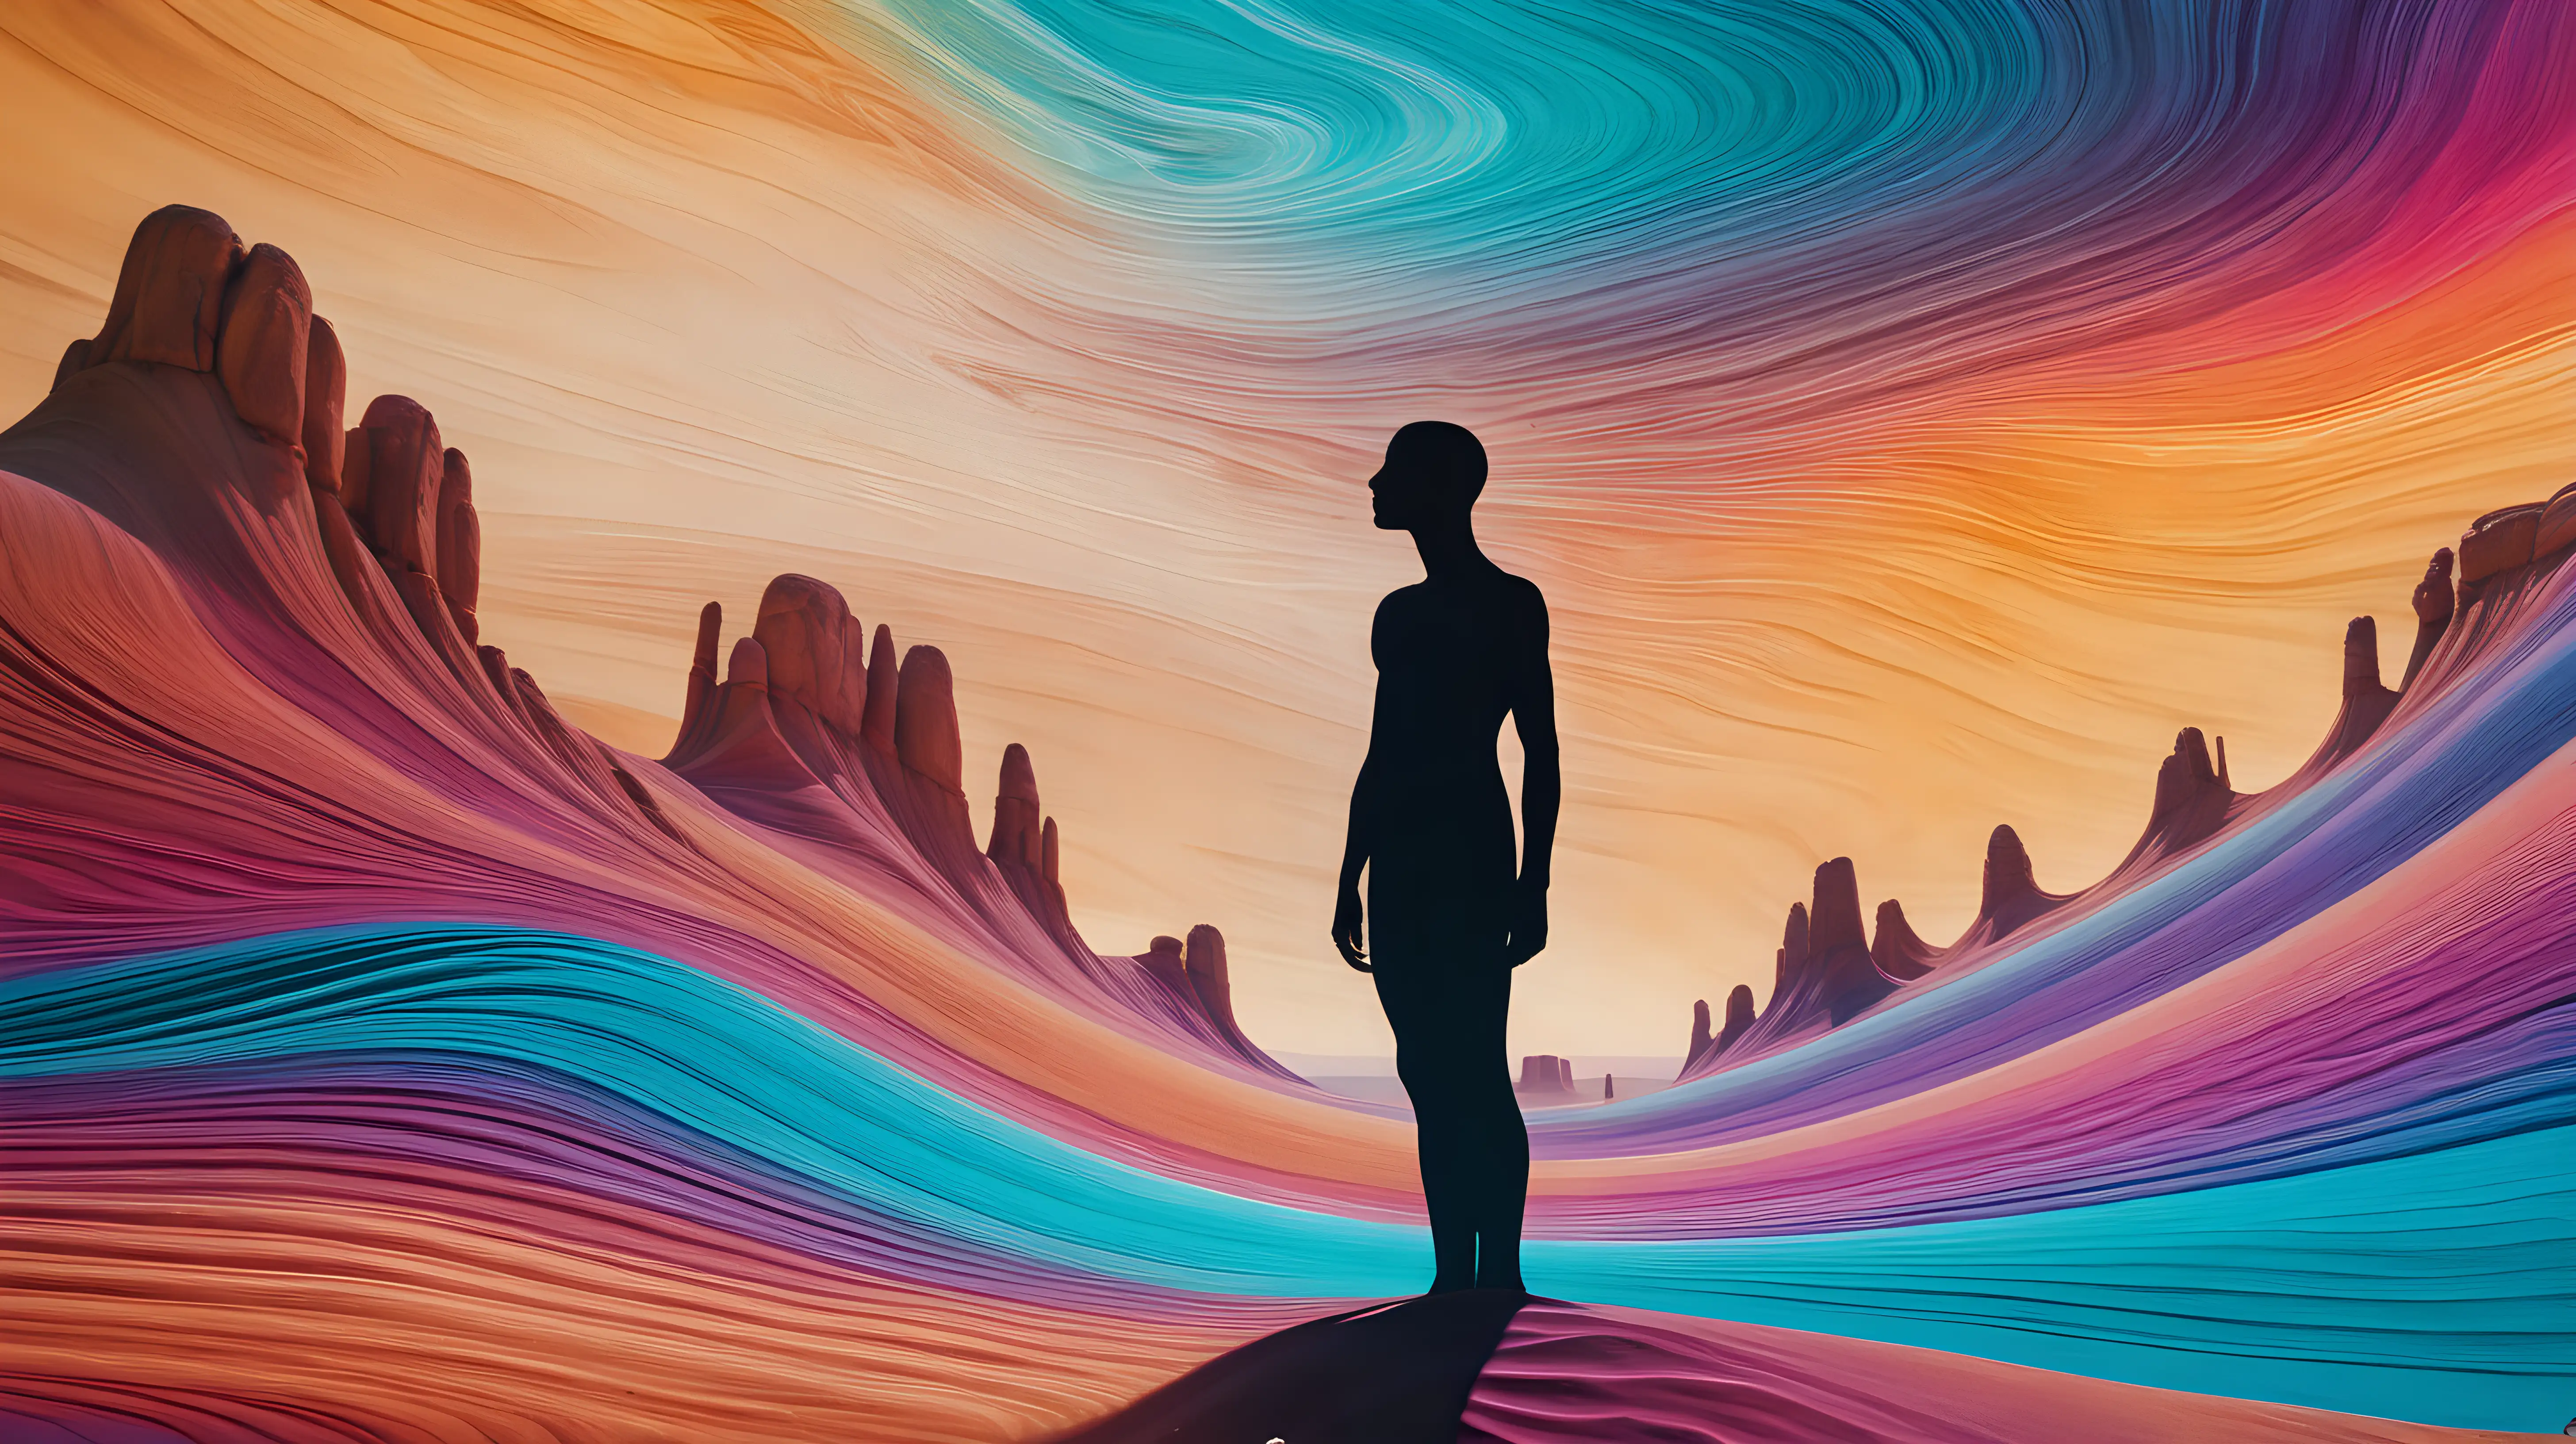 Vibrant Psychedelic Mirage Silhouetted Figure in Desert Oasis